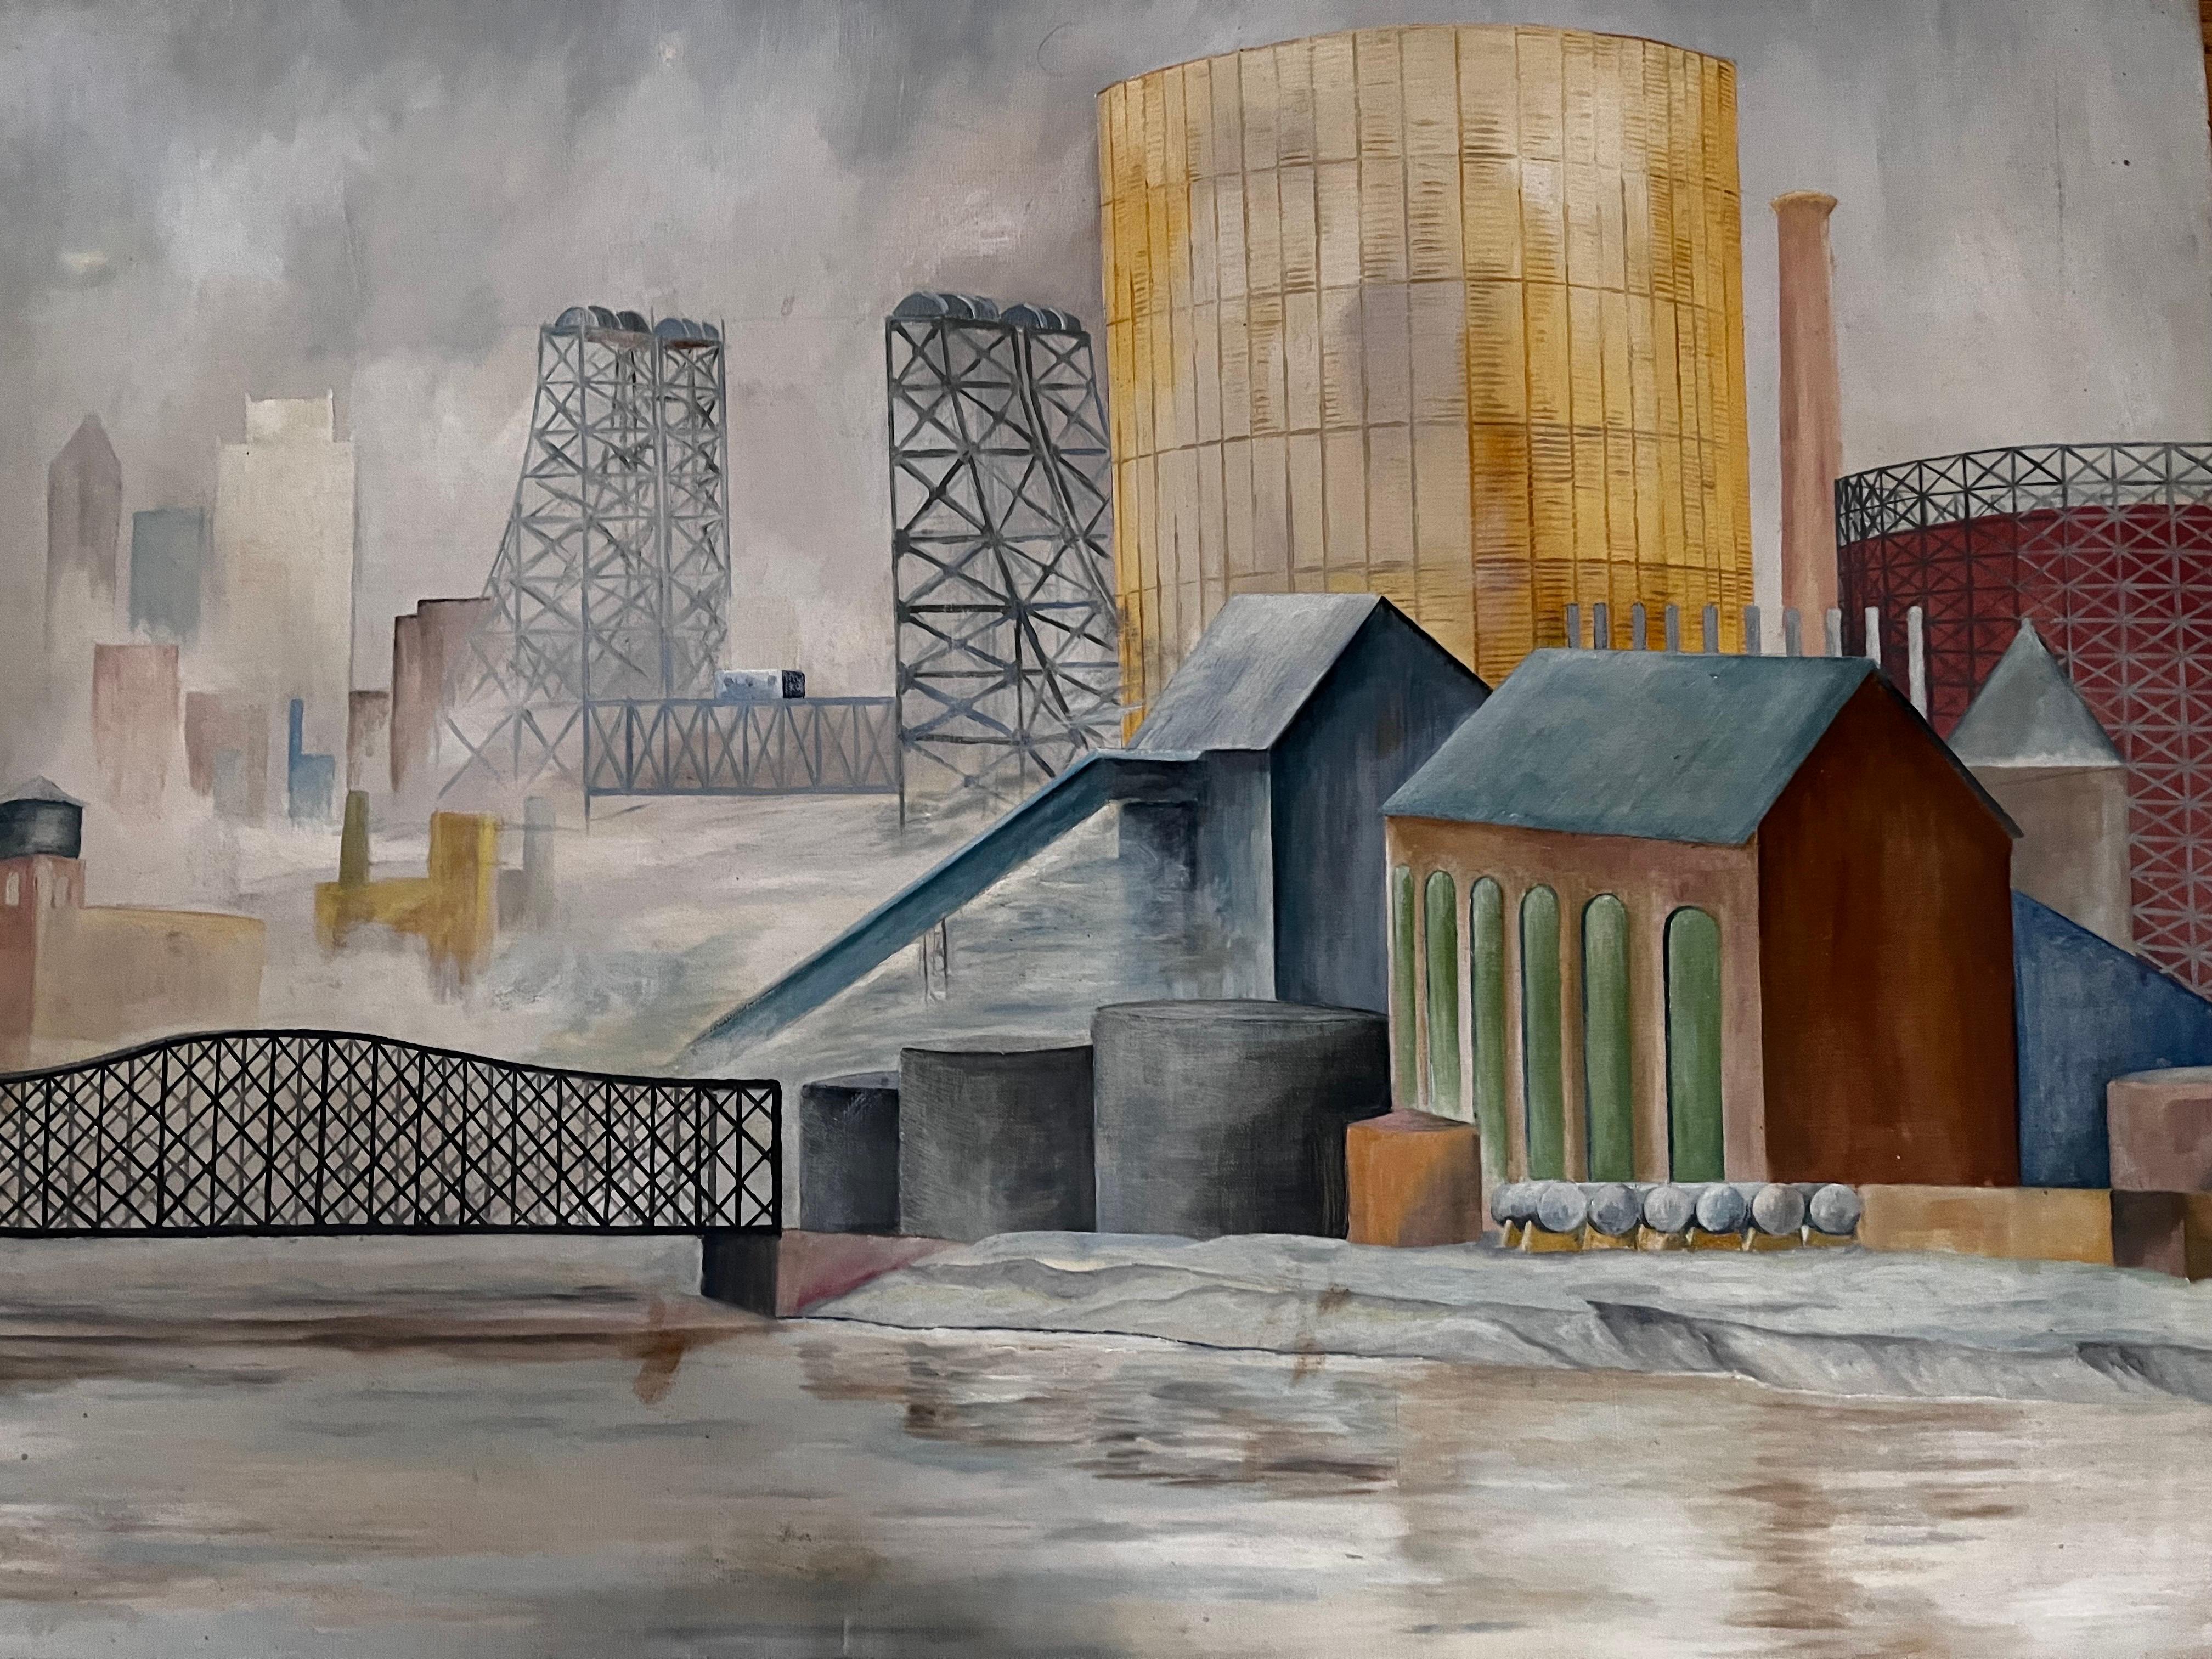 Very Nice, Old, Painting of Industrial Landscape Scene
signed Duff, 1942

couple small repairs as seen on canvas back
small 